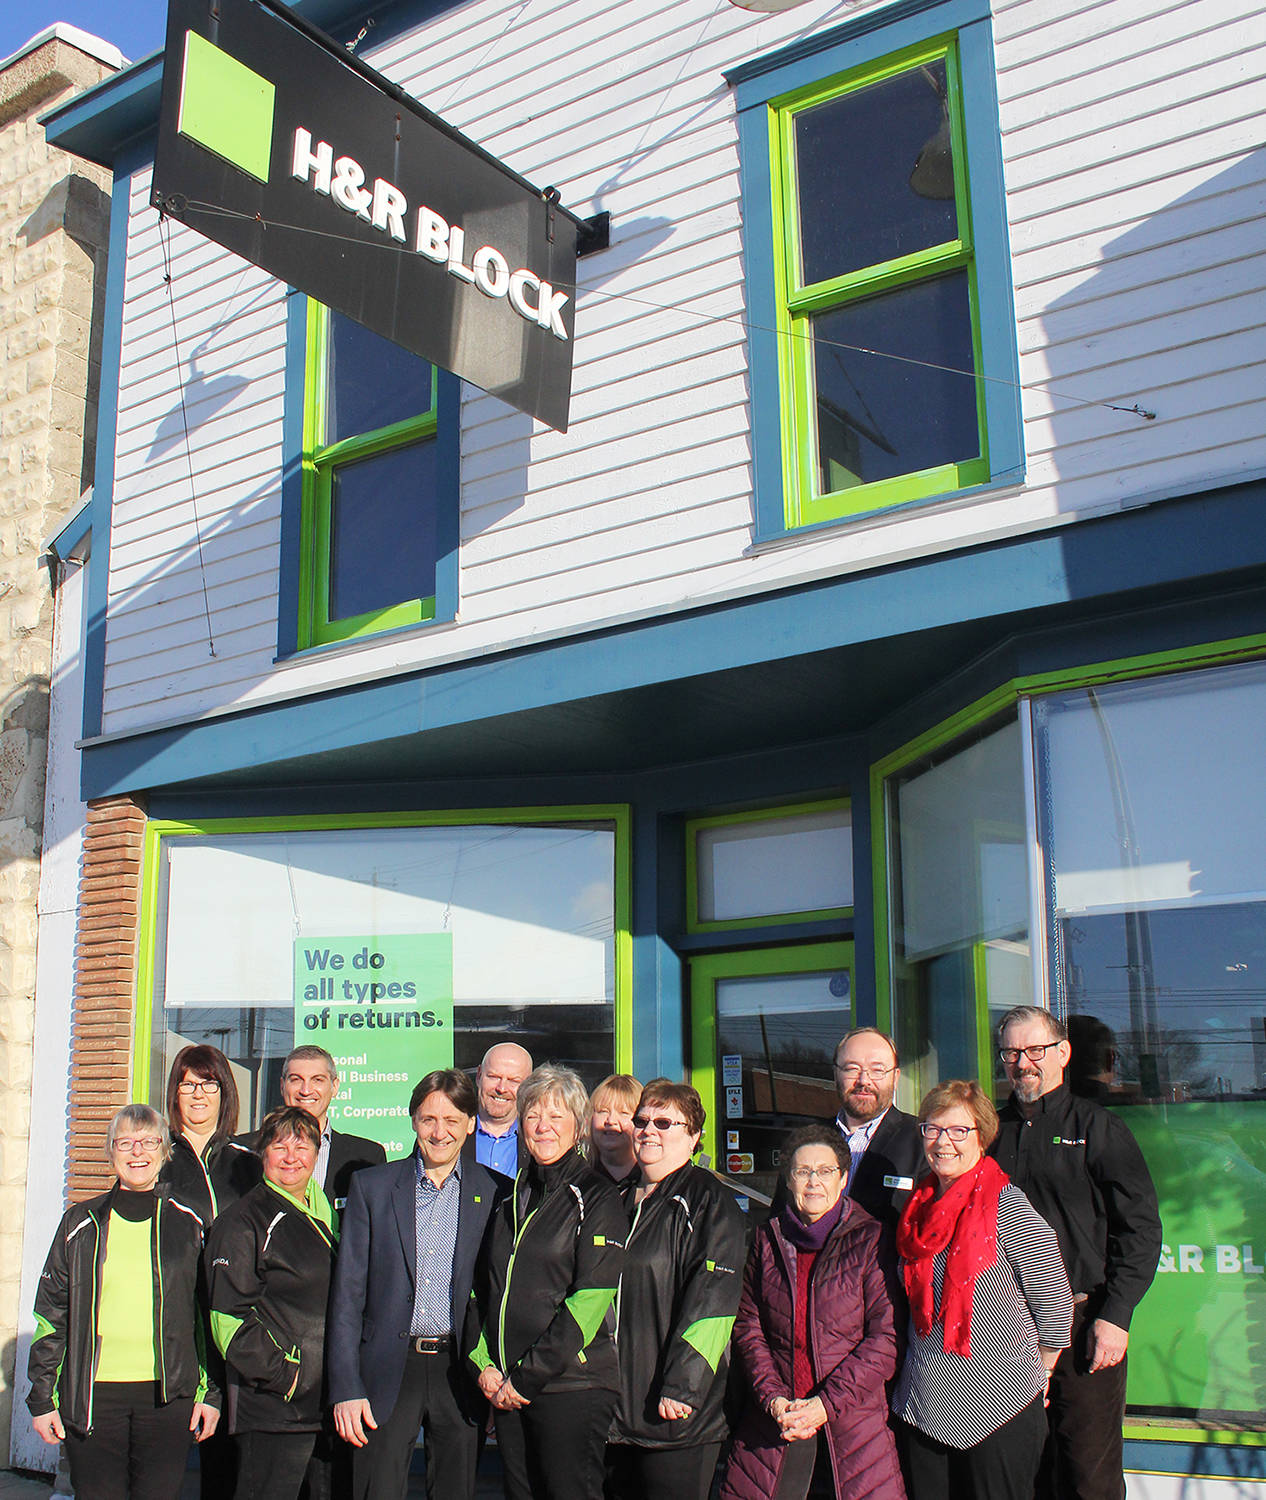 After 45 years of business in town, Ponoka’s H&R Block held a special celebration Thursday with cake and coffee for clients. The celebration is significant enough that the company president visited with company executives. Pictured in the photo are (l-r) Ursula Hefti, tax preparer; Gena Whiting, client service leader; Brenda Hulsman; senior tax pro; Altaf Hirji, AVP retail operations; Peter Bruno, president; Rob Conway, vp operations; Cecile Wahl, owner/operator; Tracy Taylor, district district manager; Joyce Vopni, tax pro; Jean Hastie, client; John Hickerson, director of franchise development plus Camrose franchise owners Janice and Allen Zimmerman.                                Photo by Jeffrey Heyden-Kayep[;